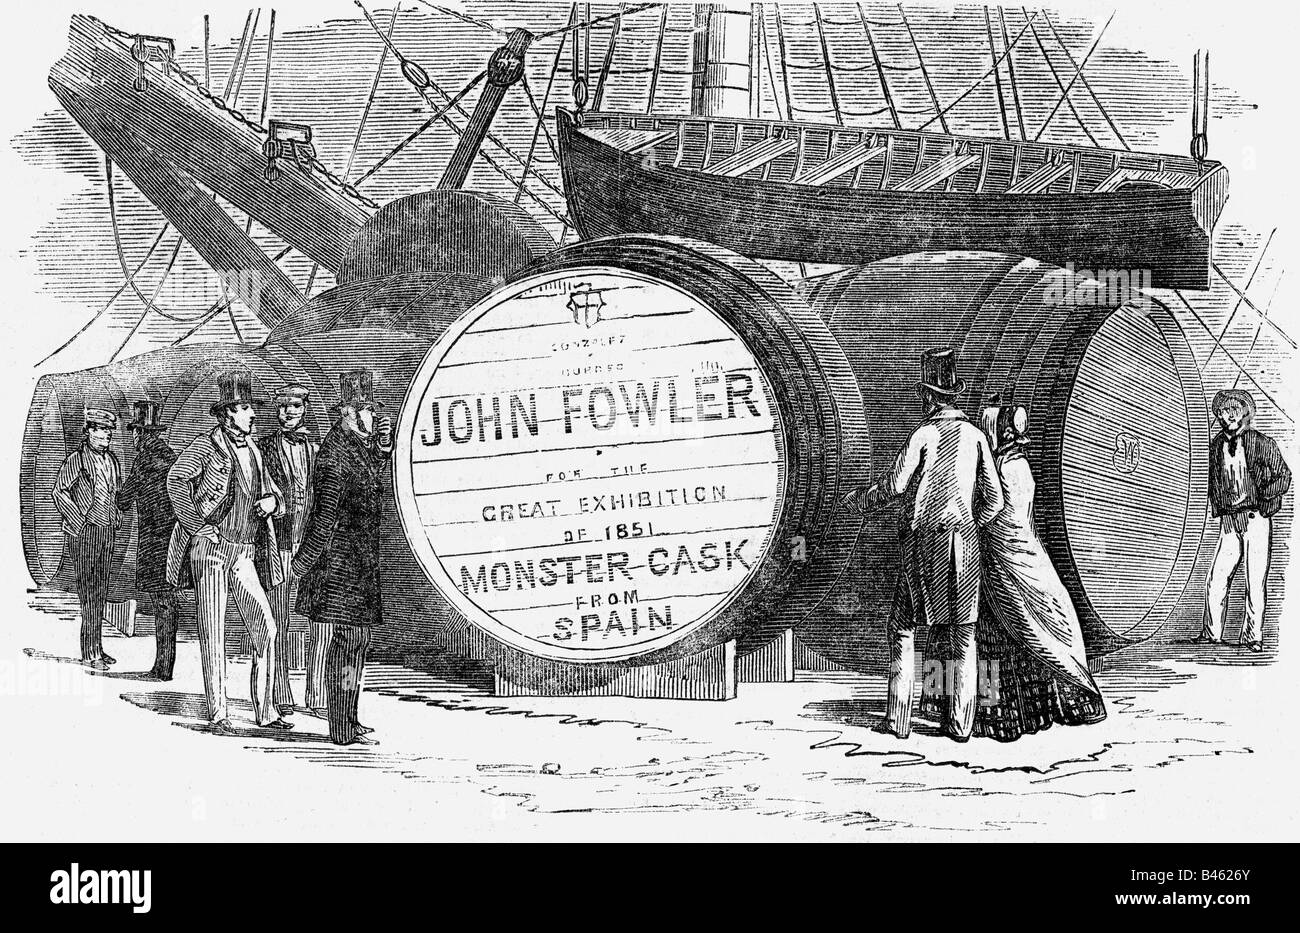 alcohol, sherry, monster cask of John fowler company for the world exposition, London docks, wood engraving, 1851, Stock Photo